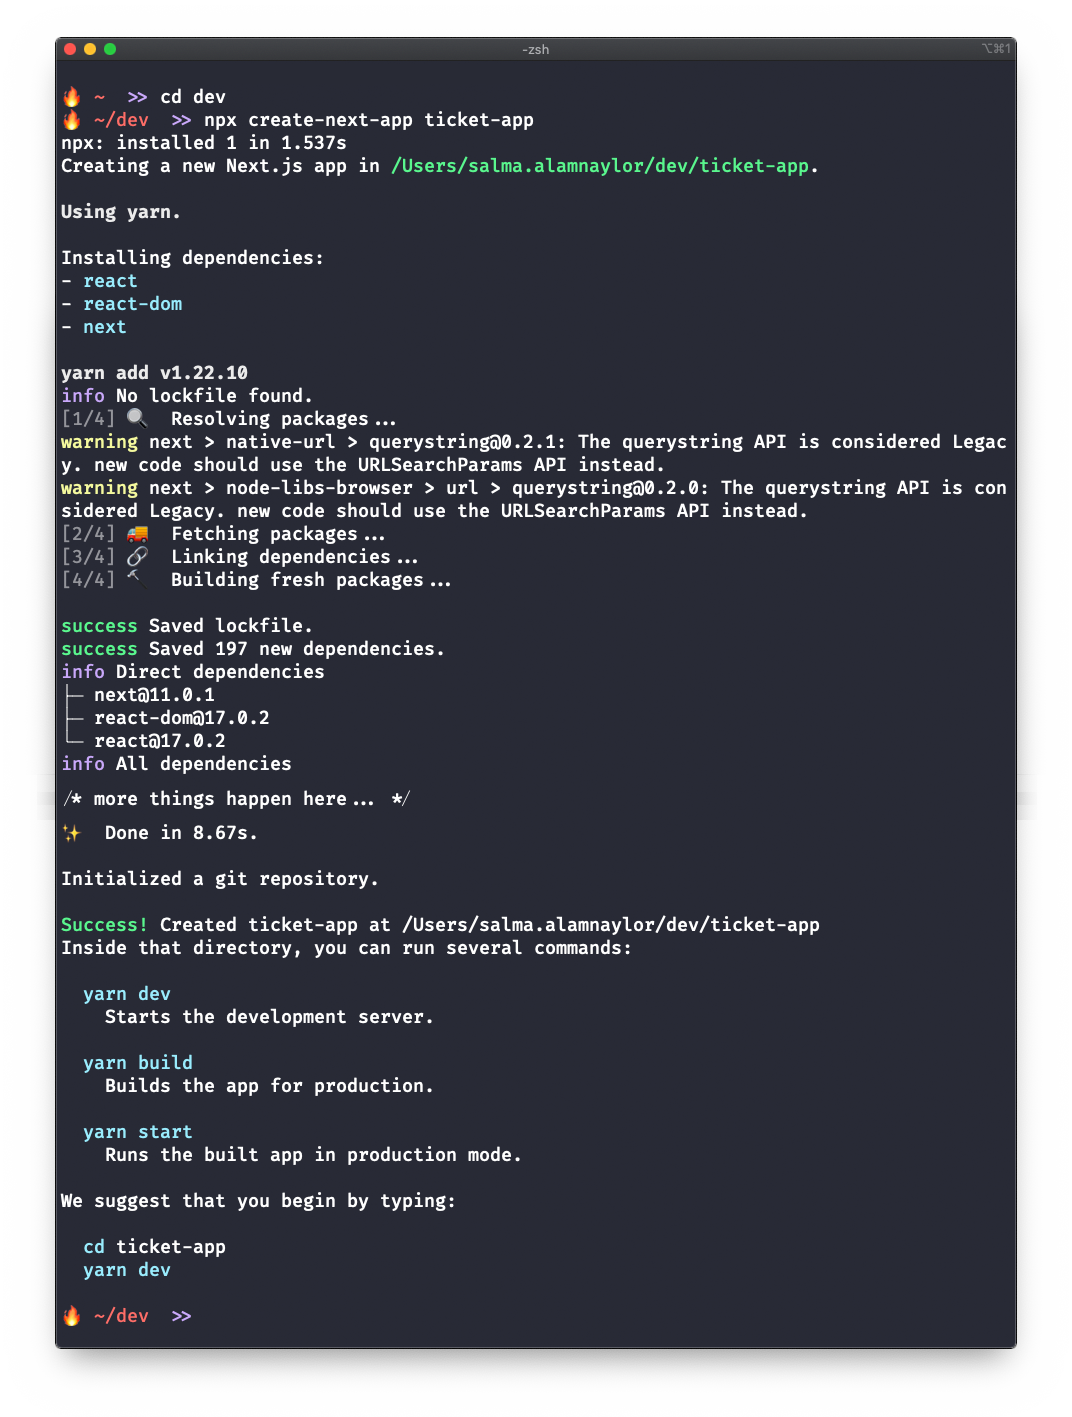 A screenshot of a terminal window showing the truncated output of the create next app command.